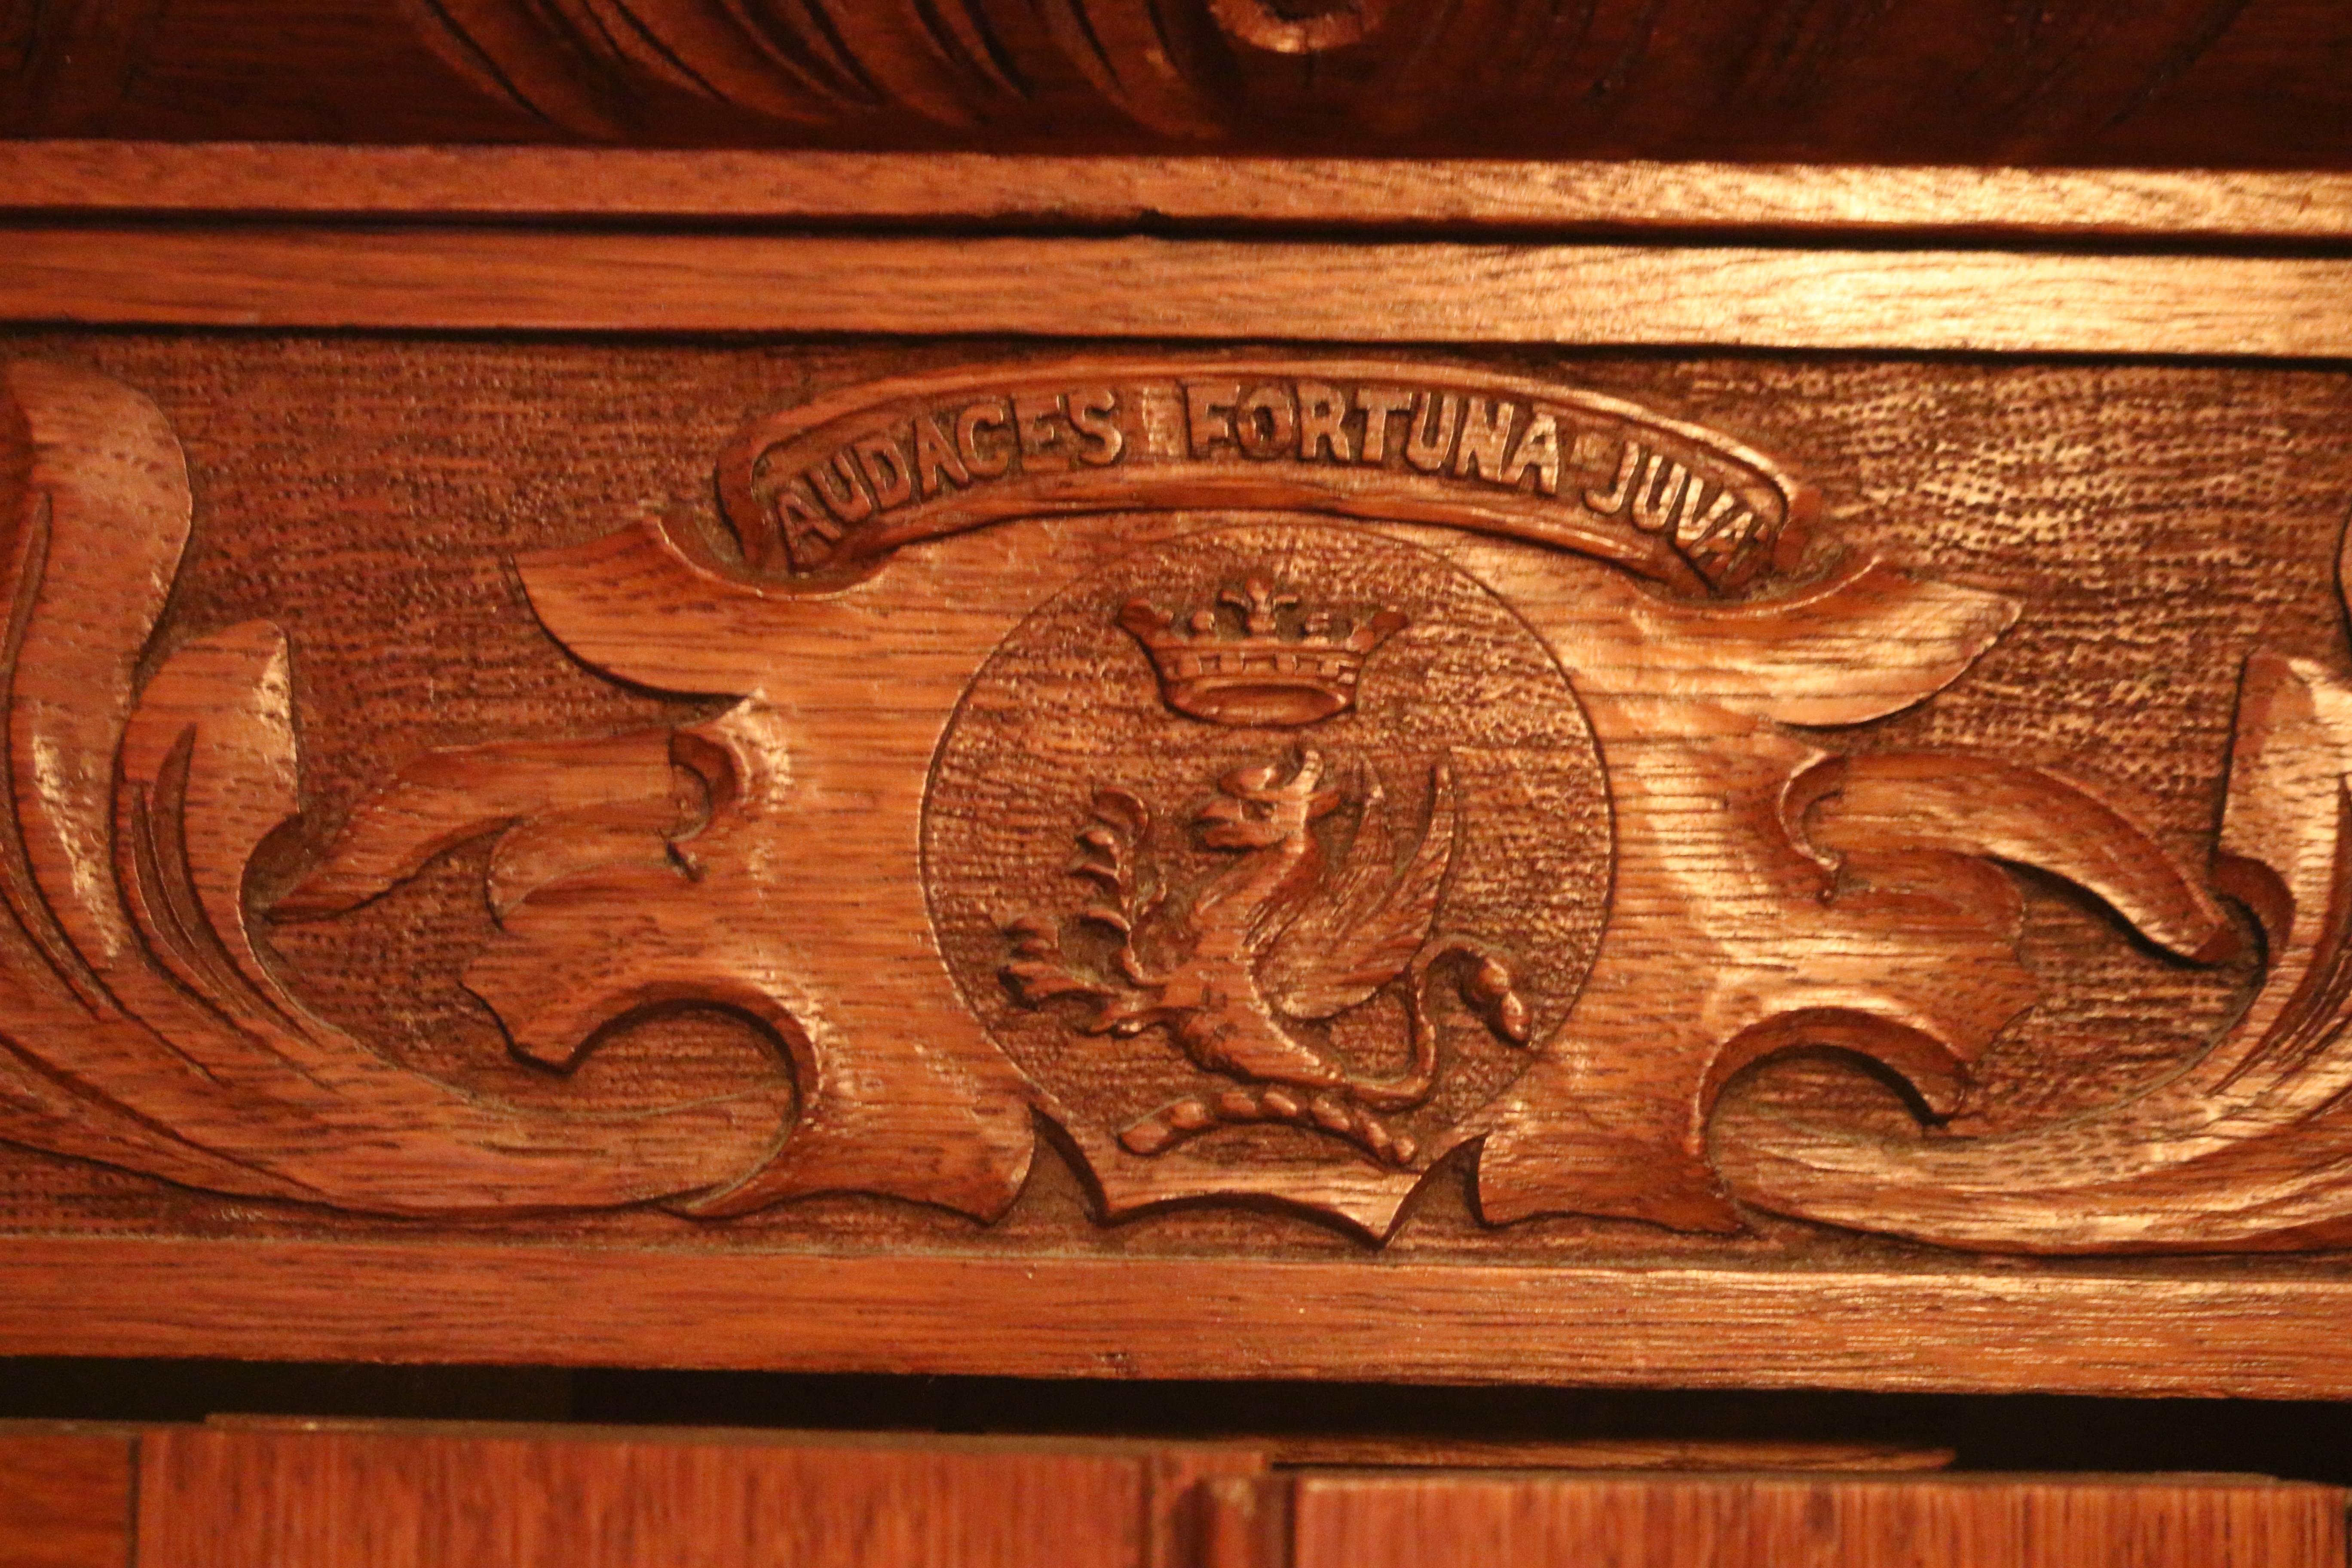 19th Century Scottish Oak Armoire with Superb Fantastical Carvings.Audaces.Fortuna.Juve For Sale